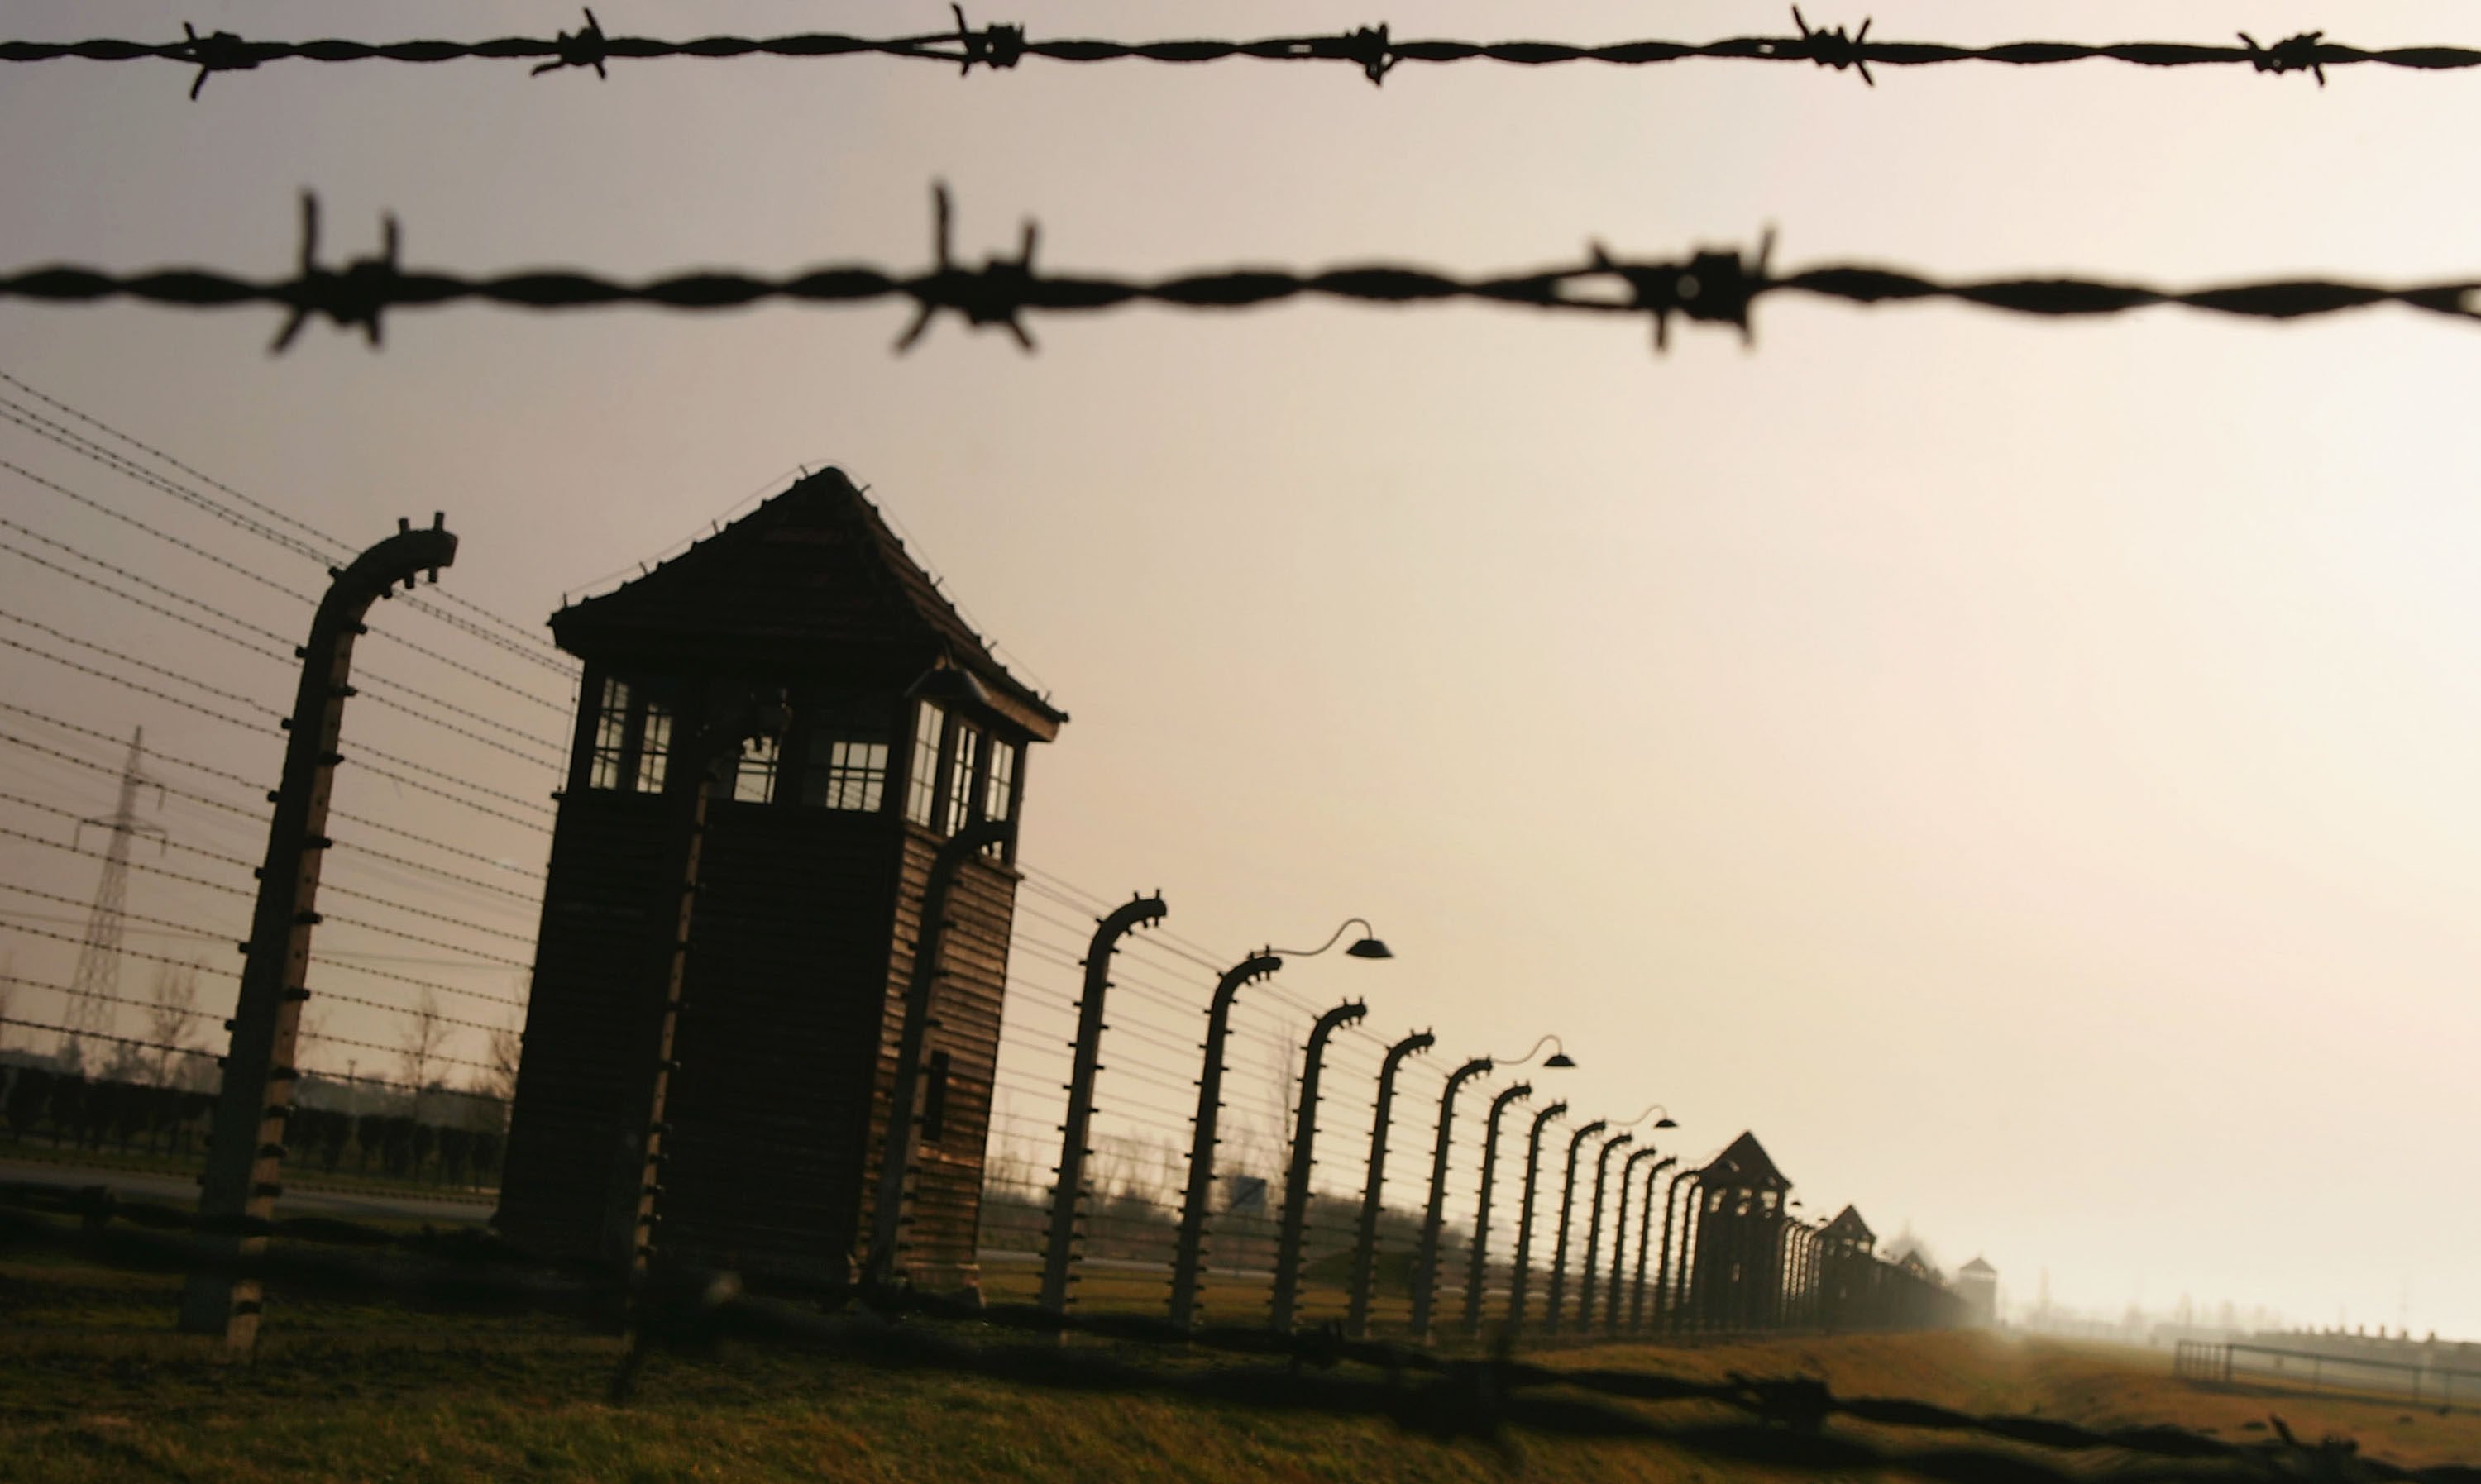 Watch towers surround the Auschwitz II-Birkenau Nazi death camp in present-day Poland, one of several where Jews were exterminated in the second world war. The word genocide was coined in 1944 to describe Nazi Germany’s attempt to eliminate European Jewry. Photo: Getty Images